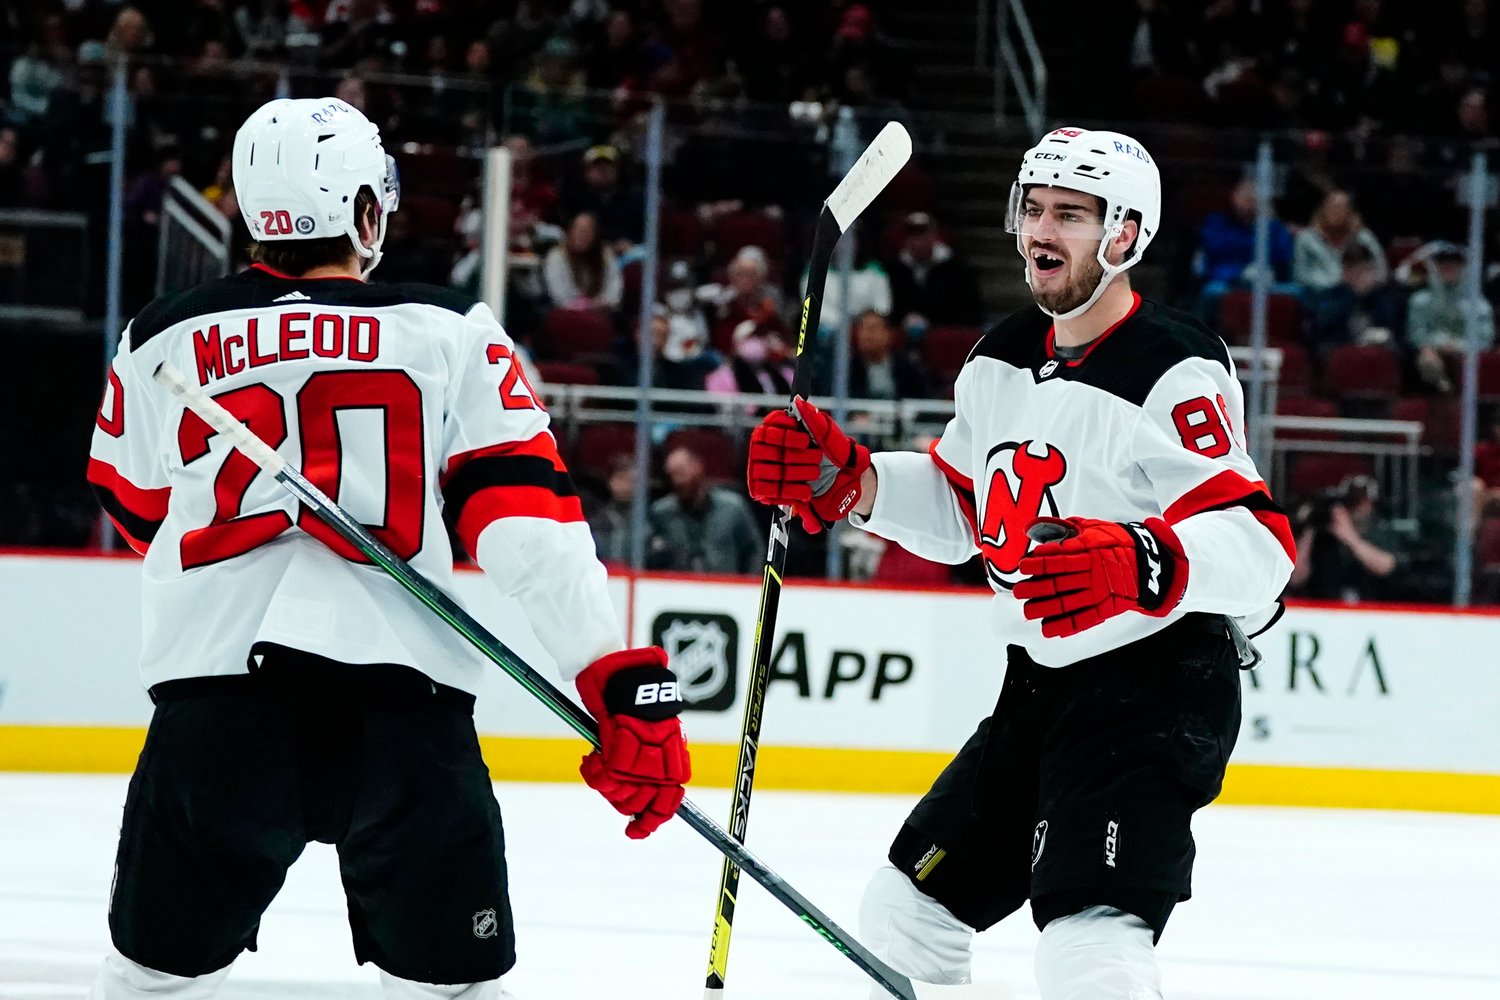 MILESTONE — Kevin Bahl, right, celebrates his first NHL goal with center Michael McLeod (20) during the second period of the team’s game against the Arizona Coyotes on Tuesday night.